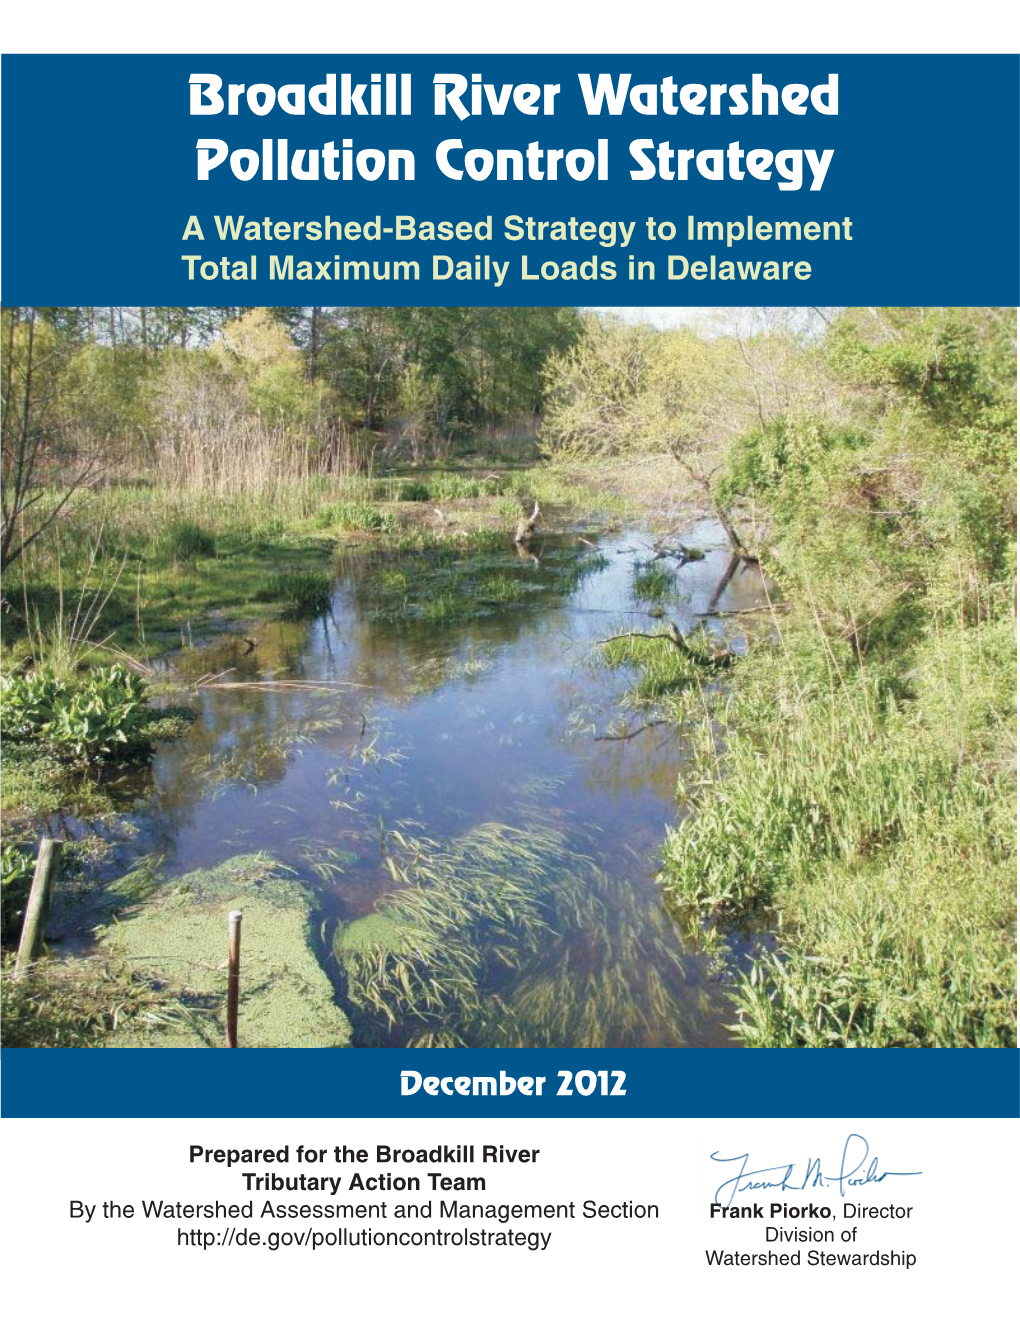 Broadkill River Watershed Pollution Control Strategy a Watershed-Based Strategy to Implement Total Maximum Daily Loads in Delaware